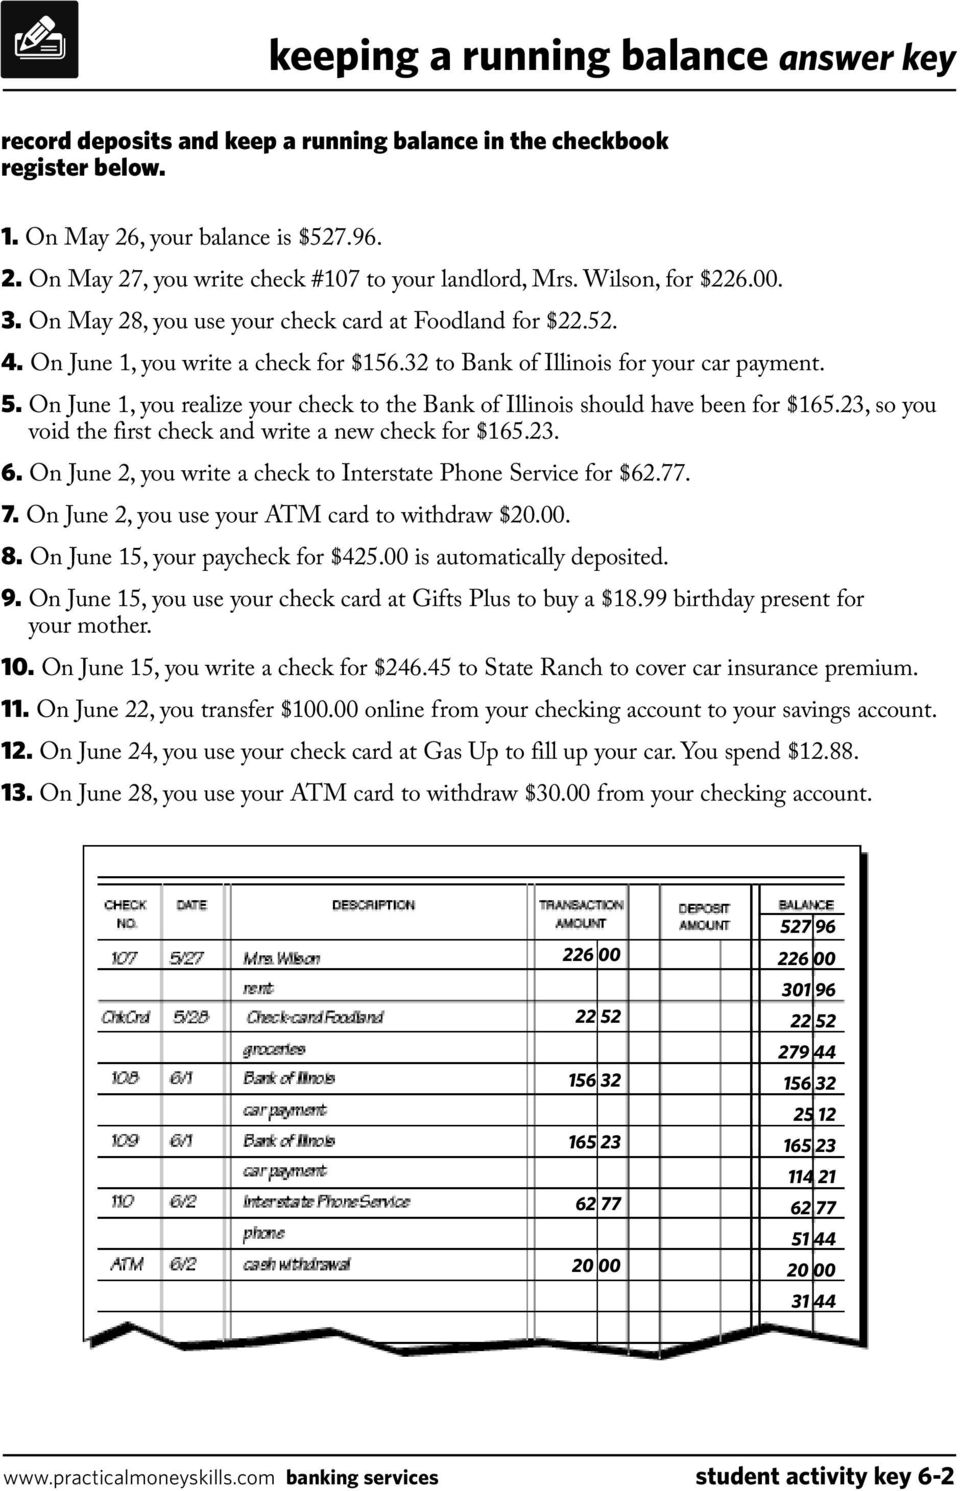 keeping a running balance answer key - PDF Free Download In Checkbook Register Worksheet 1 Answers